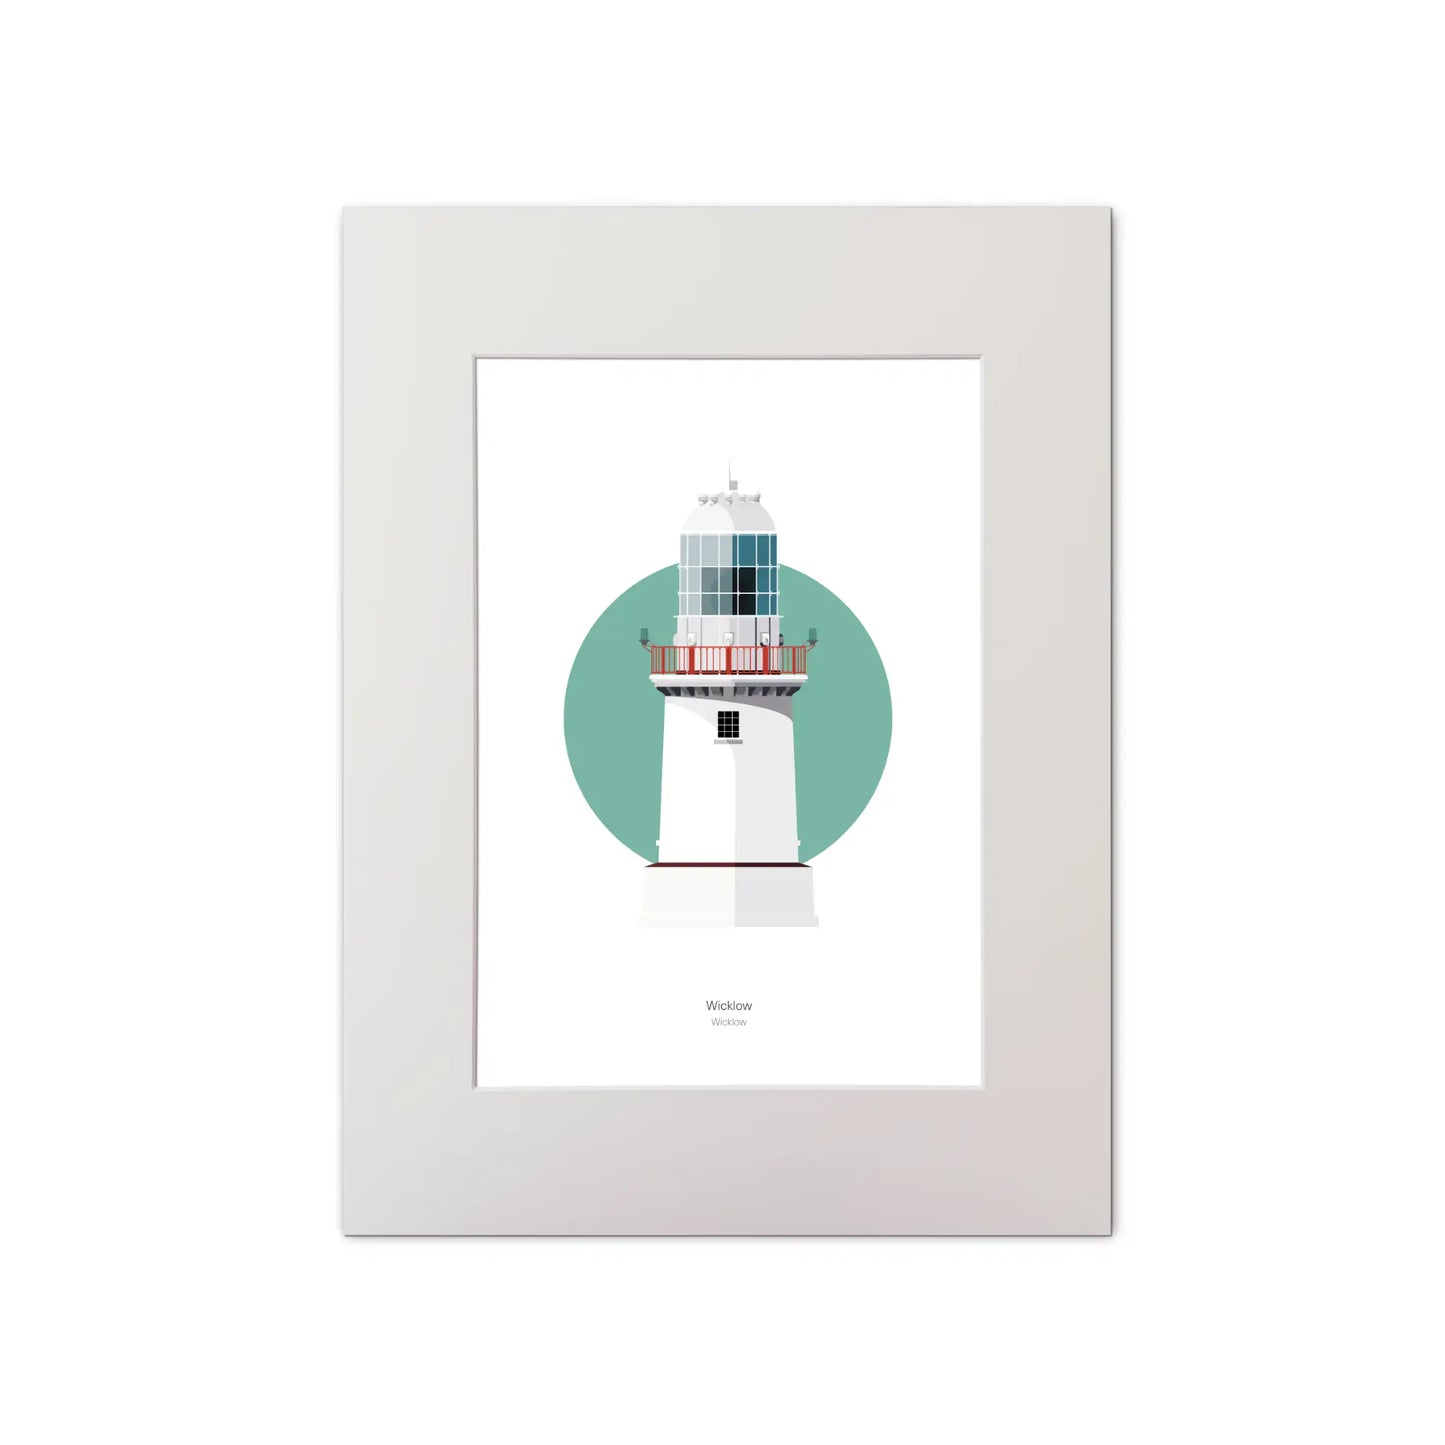 Illustration of Wicklow New lighthouse on a white background inside light blue square, mounted and measuring 30x40cm.